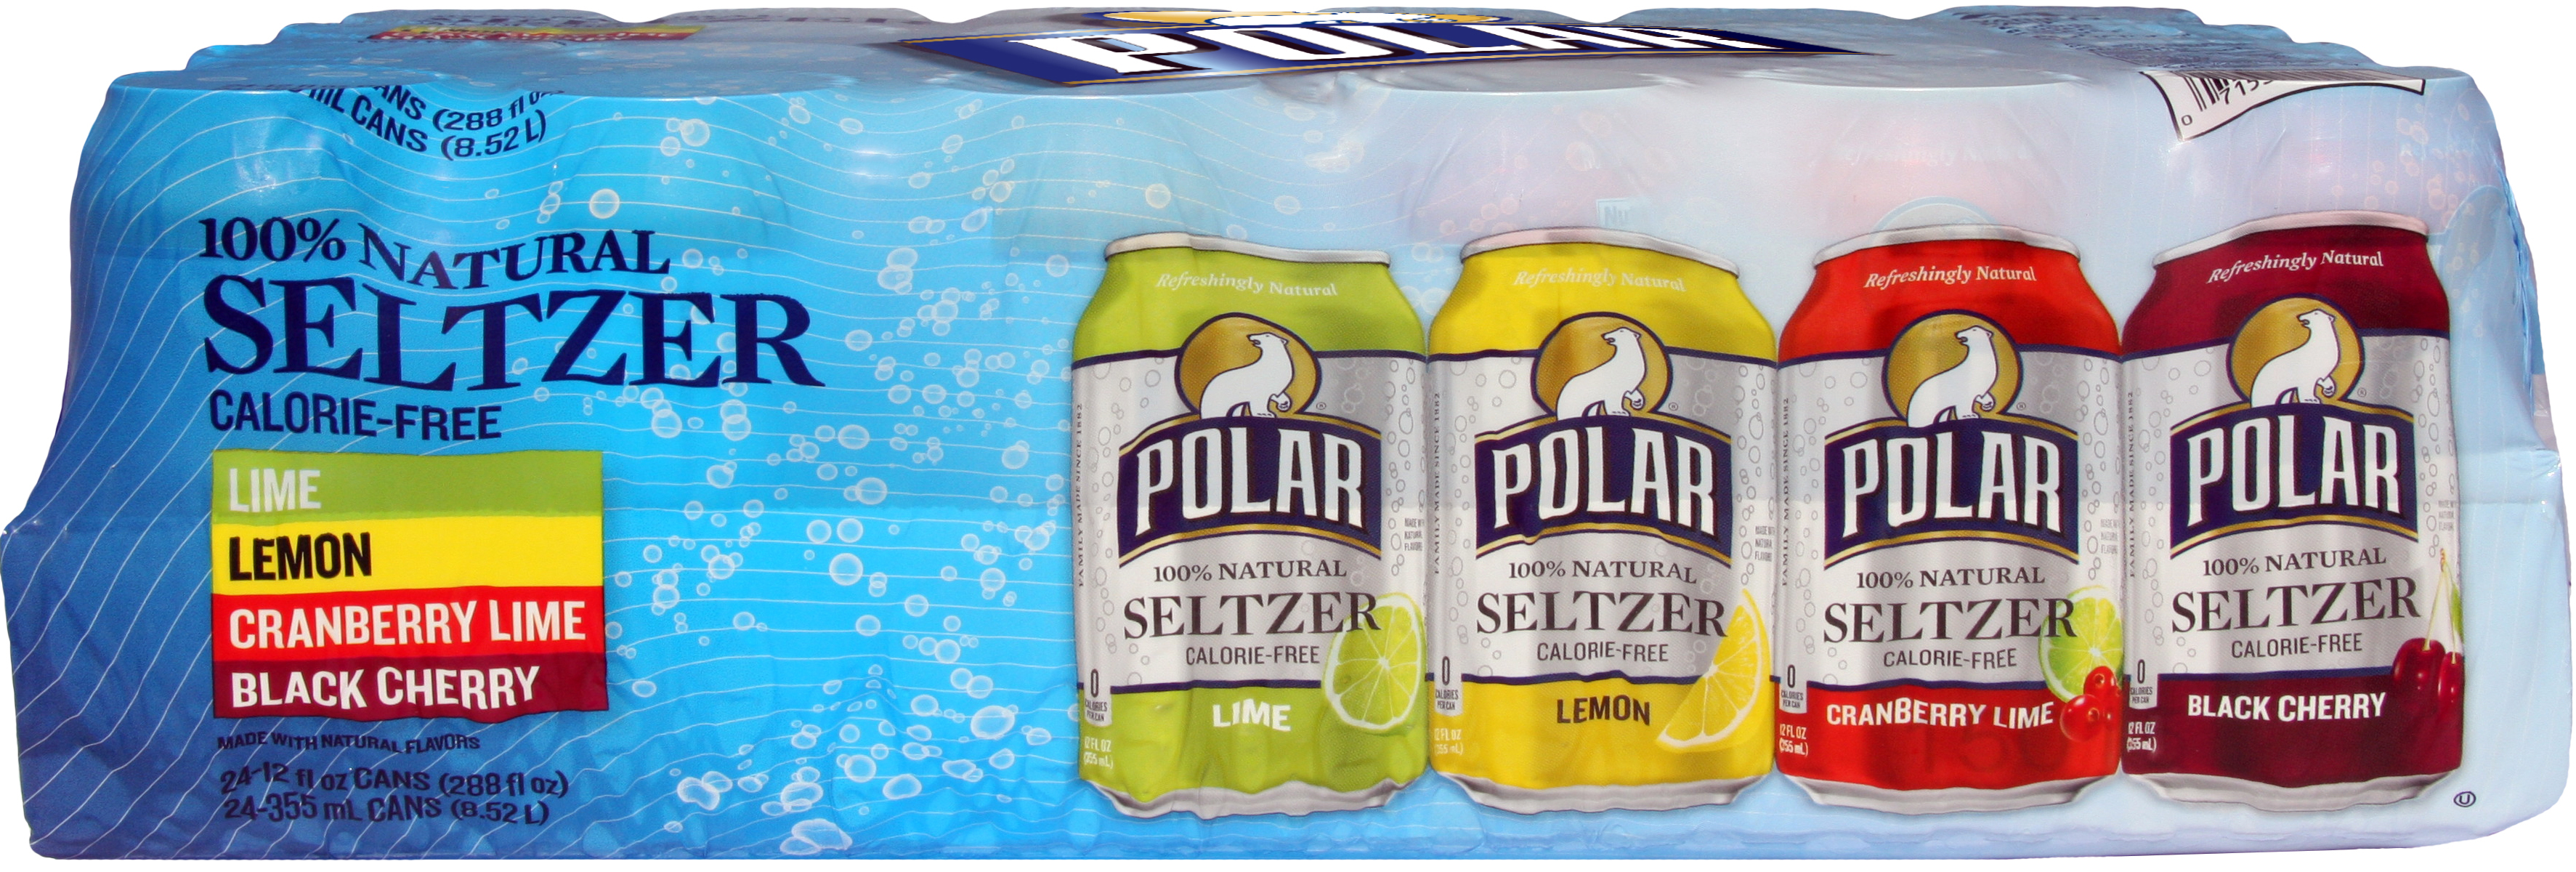 Polar Sparkling Water, 12 Fl Oz, 24 Count Cans - image 1 of 2